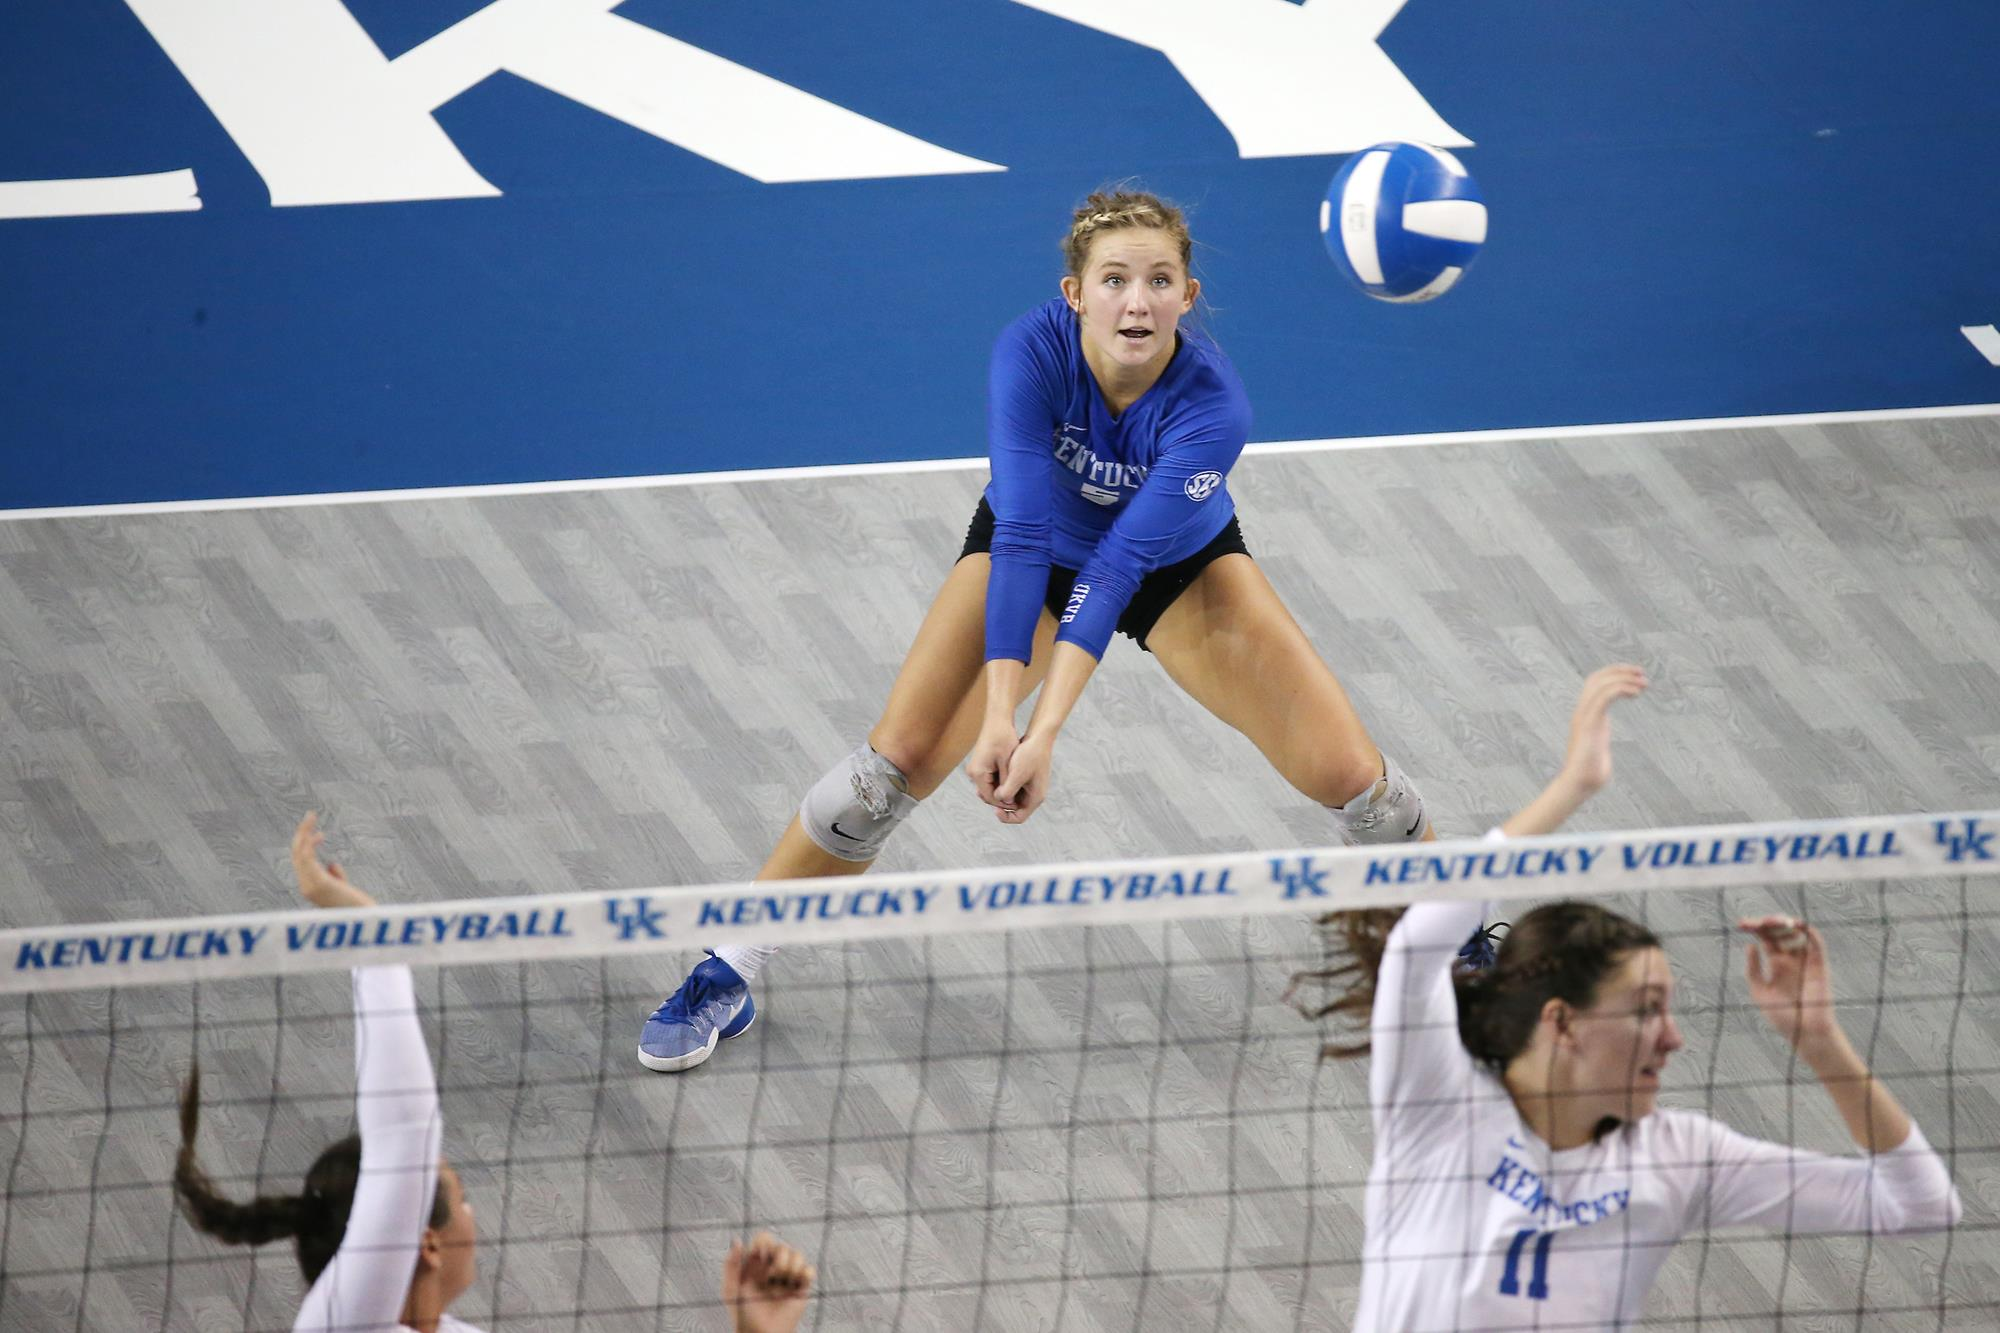 UK Volleyball's Dusek Impacts Program On and Off Court